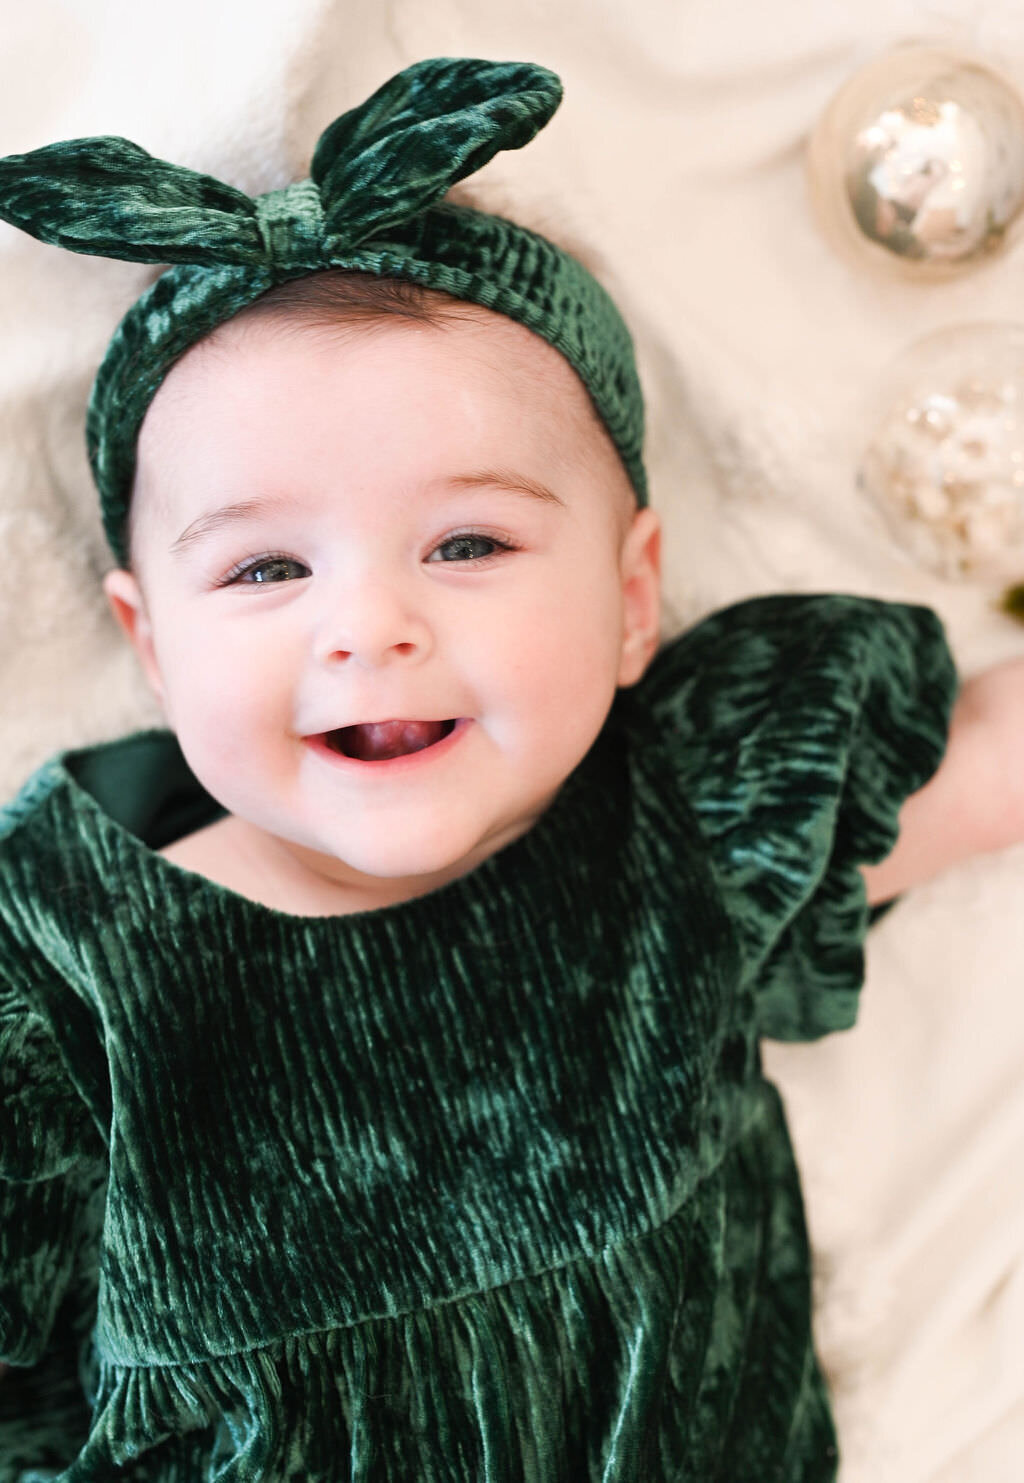 A small child smiling in a green velvet dress and bow.